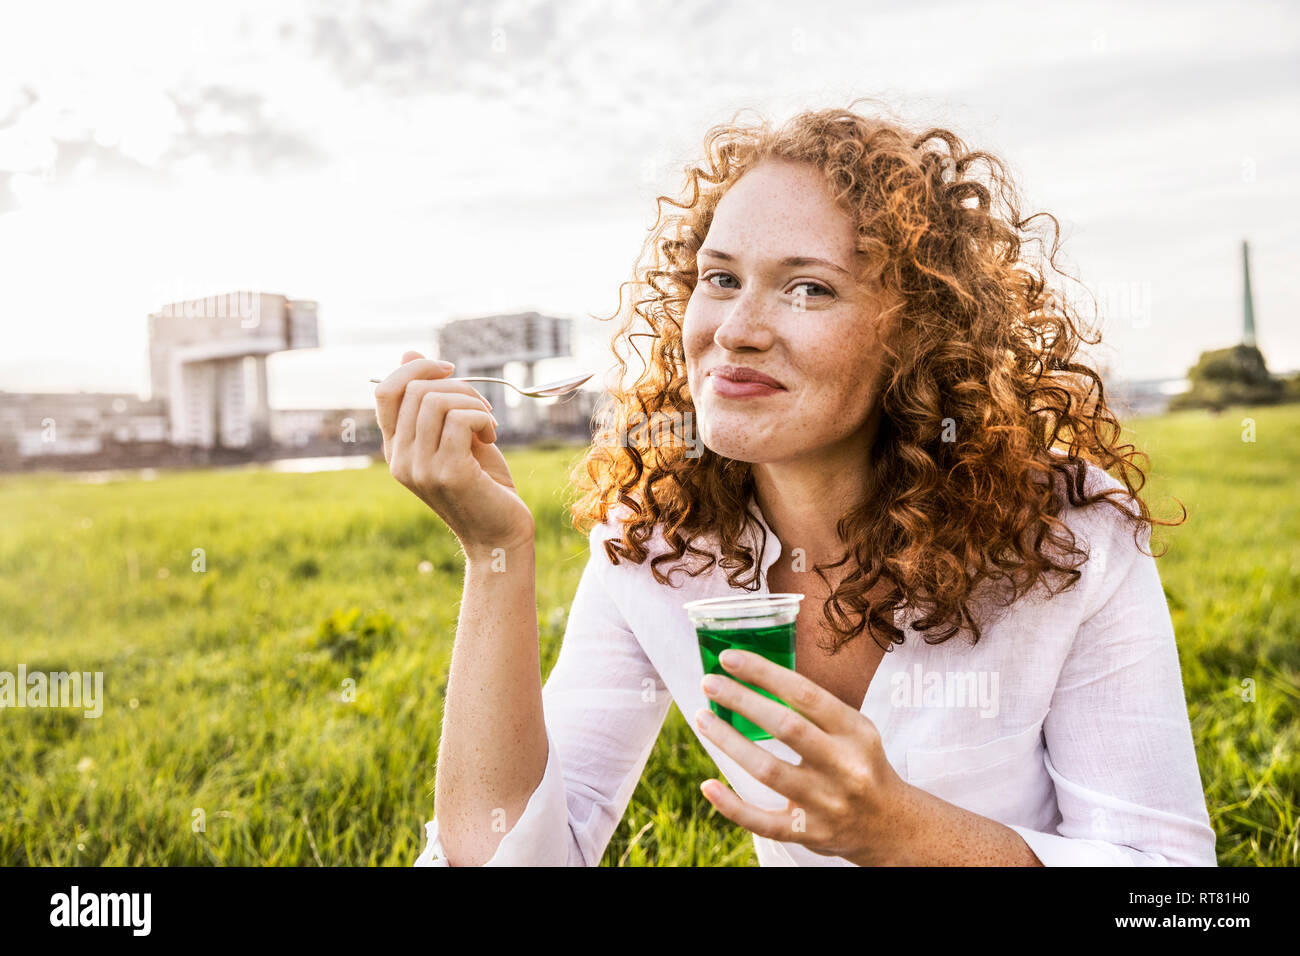 Germany, Cologne, portrait of happy young woman eating jelly on meadow Stock Photo